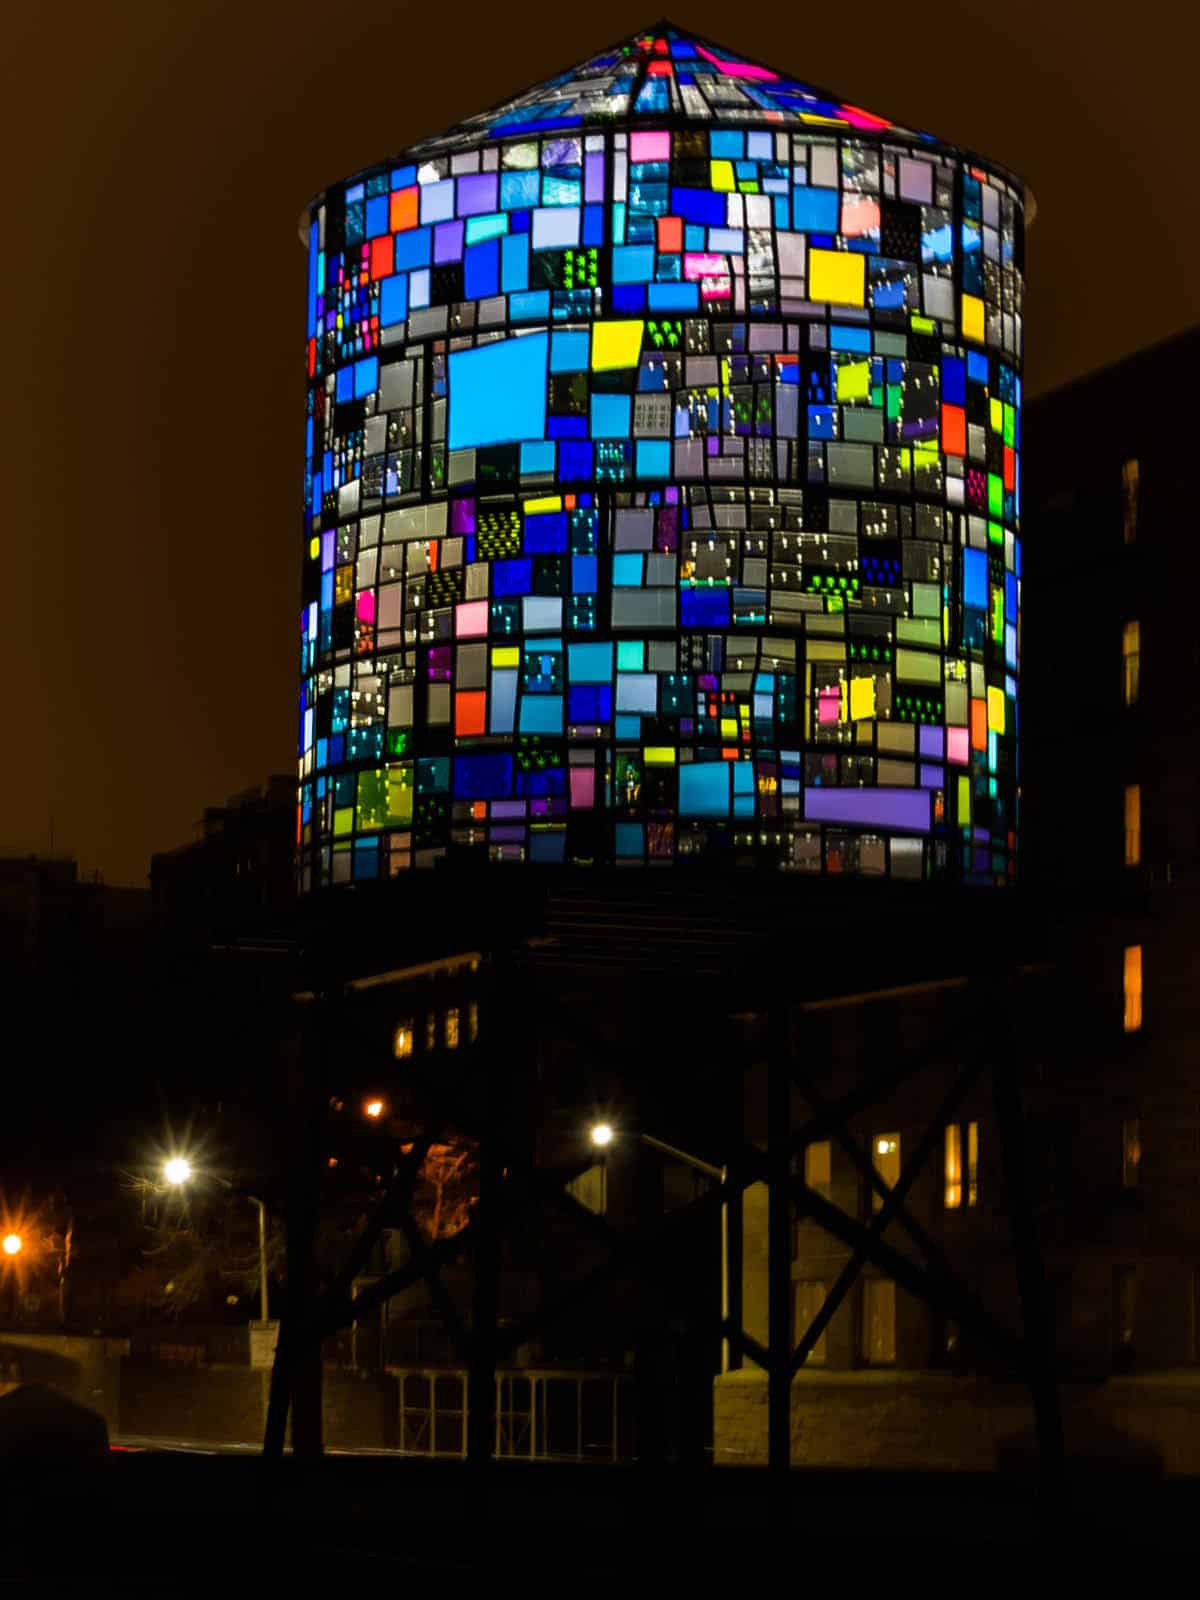 View of Watertower II by Tom Fruin lit up at night. Sculpture is made from colored plexiglas and lit from within.